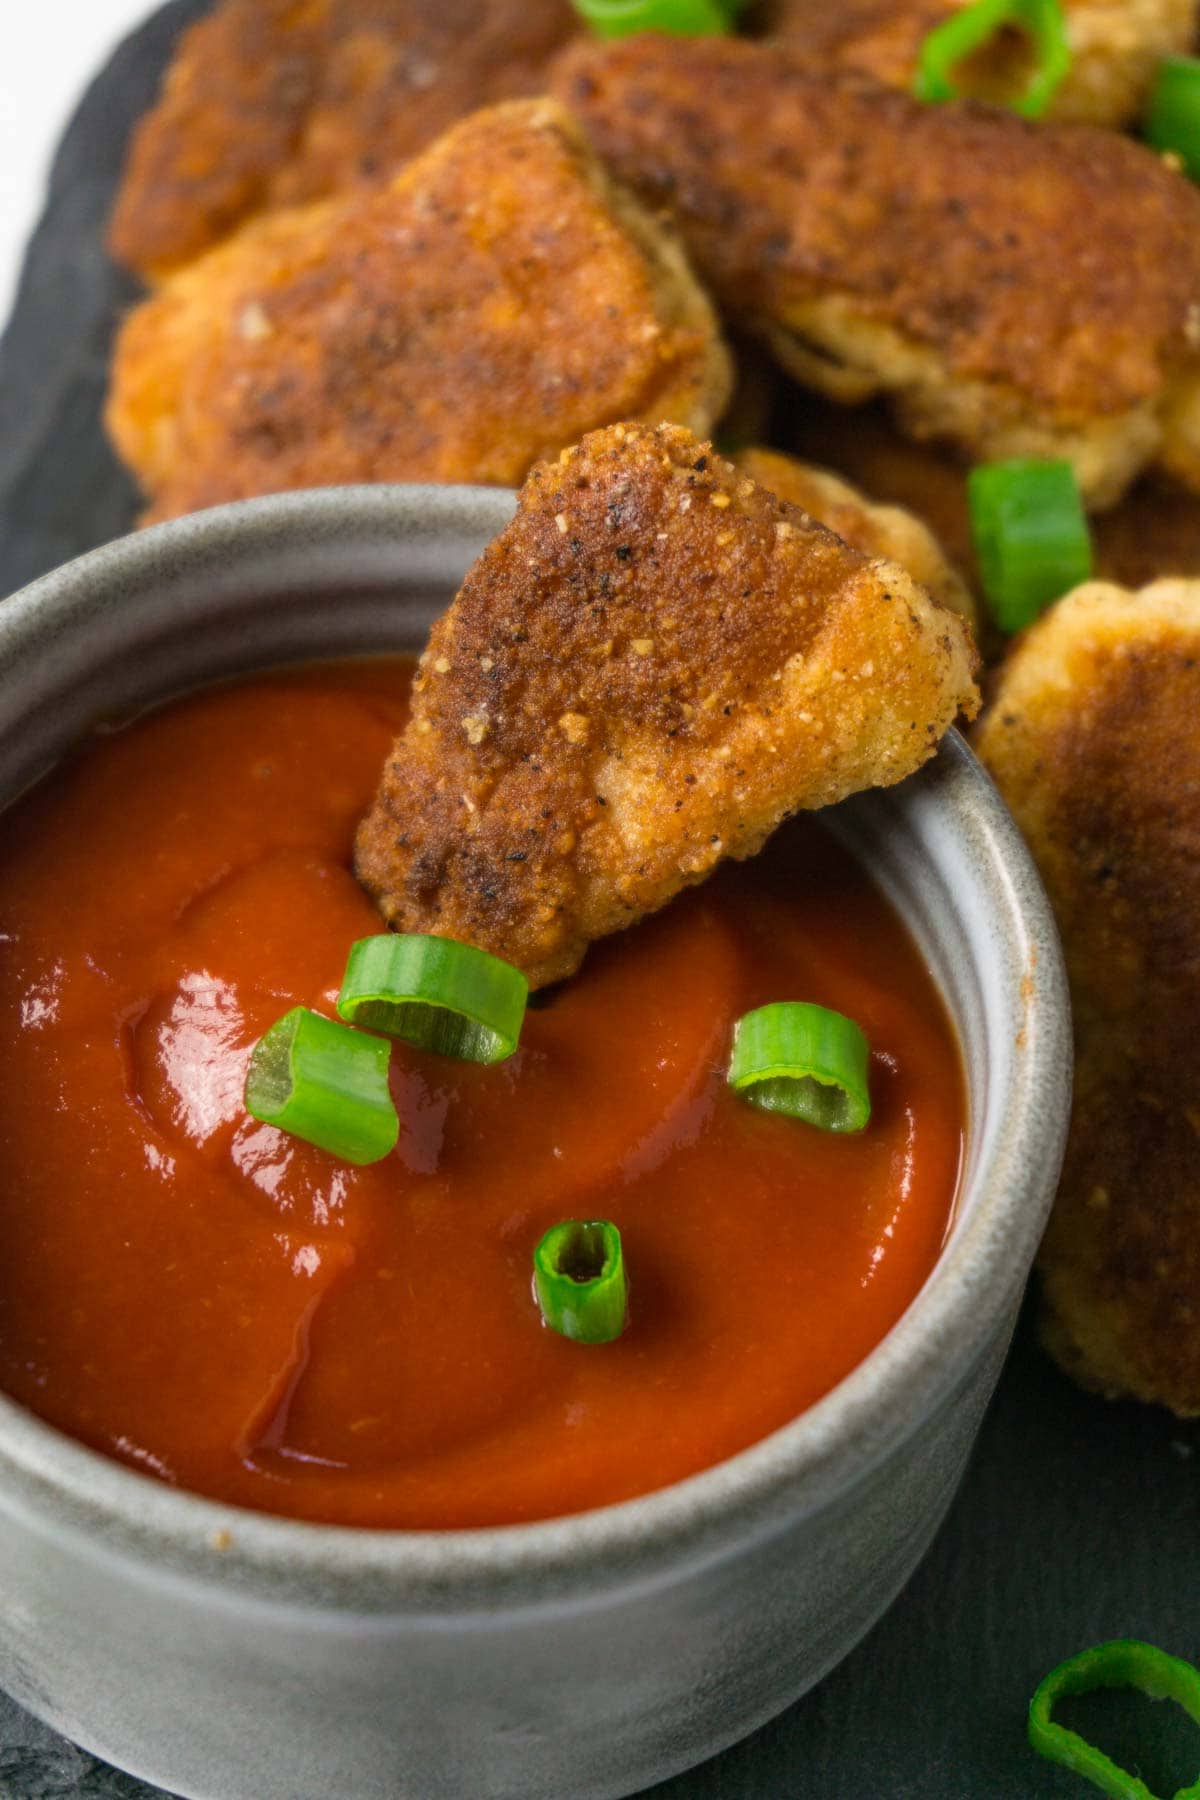 One chicken nugget in a small bowl with ketchup, more nuggets on the background.